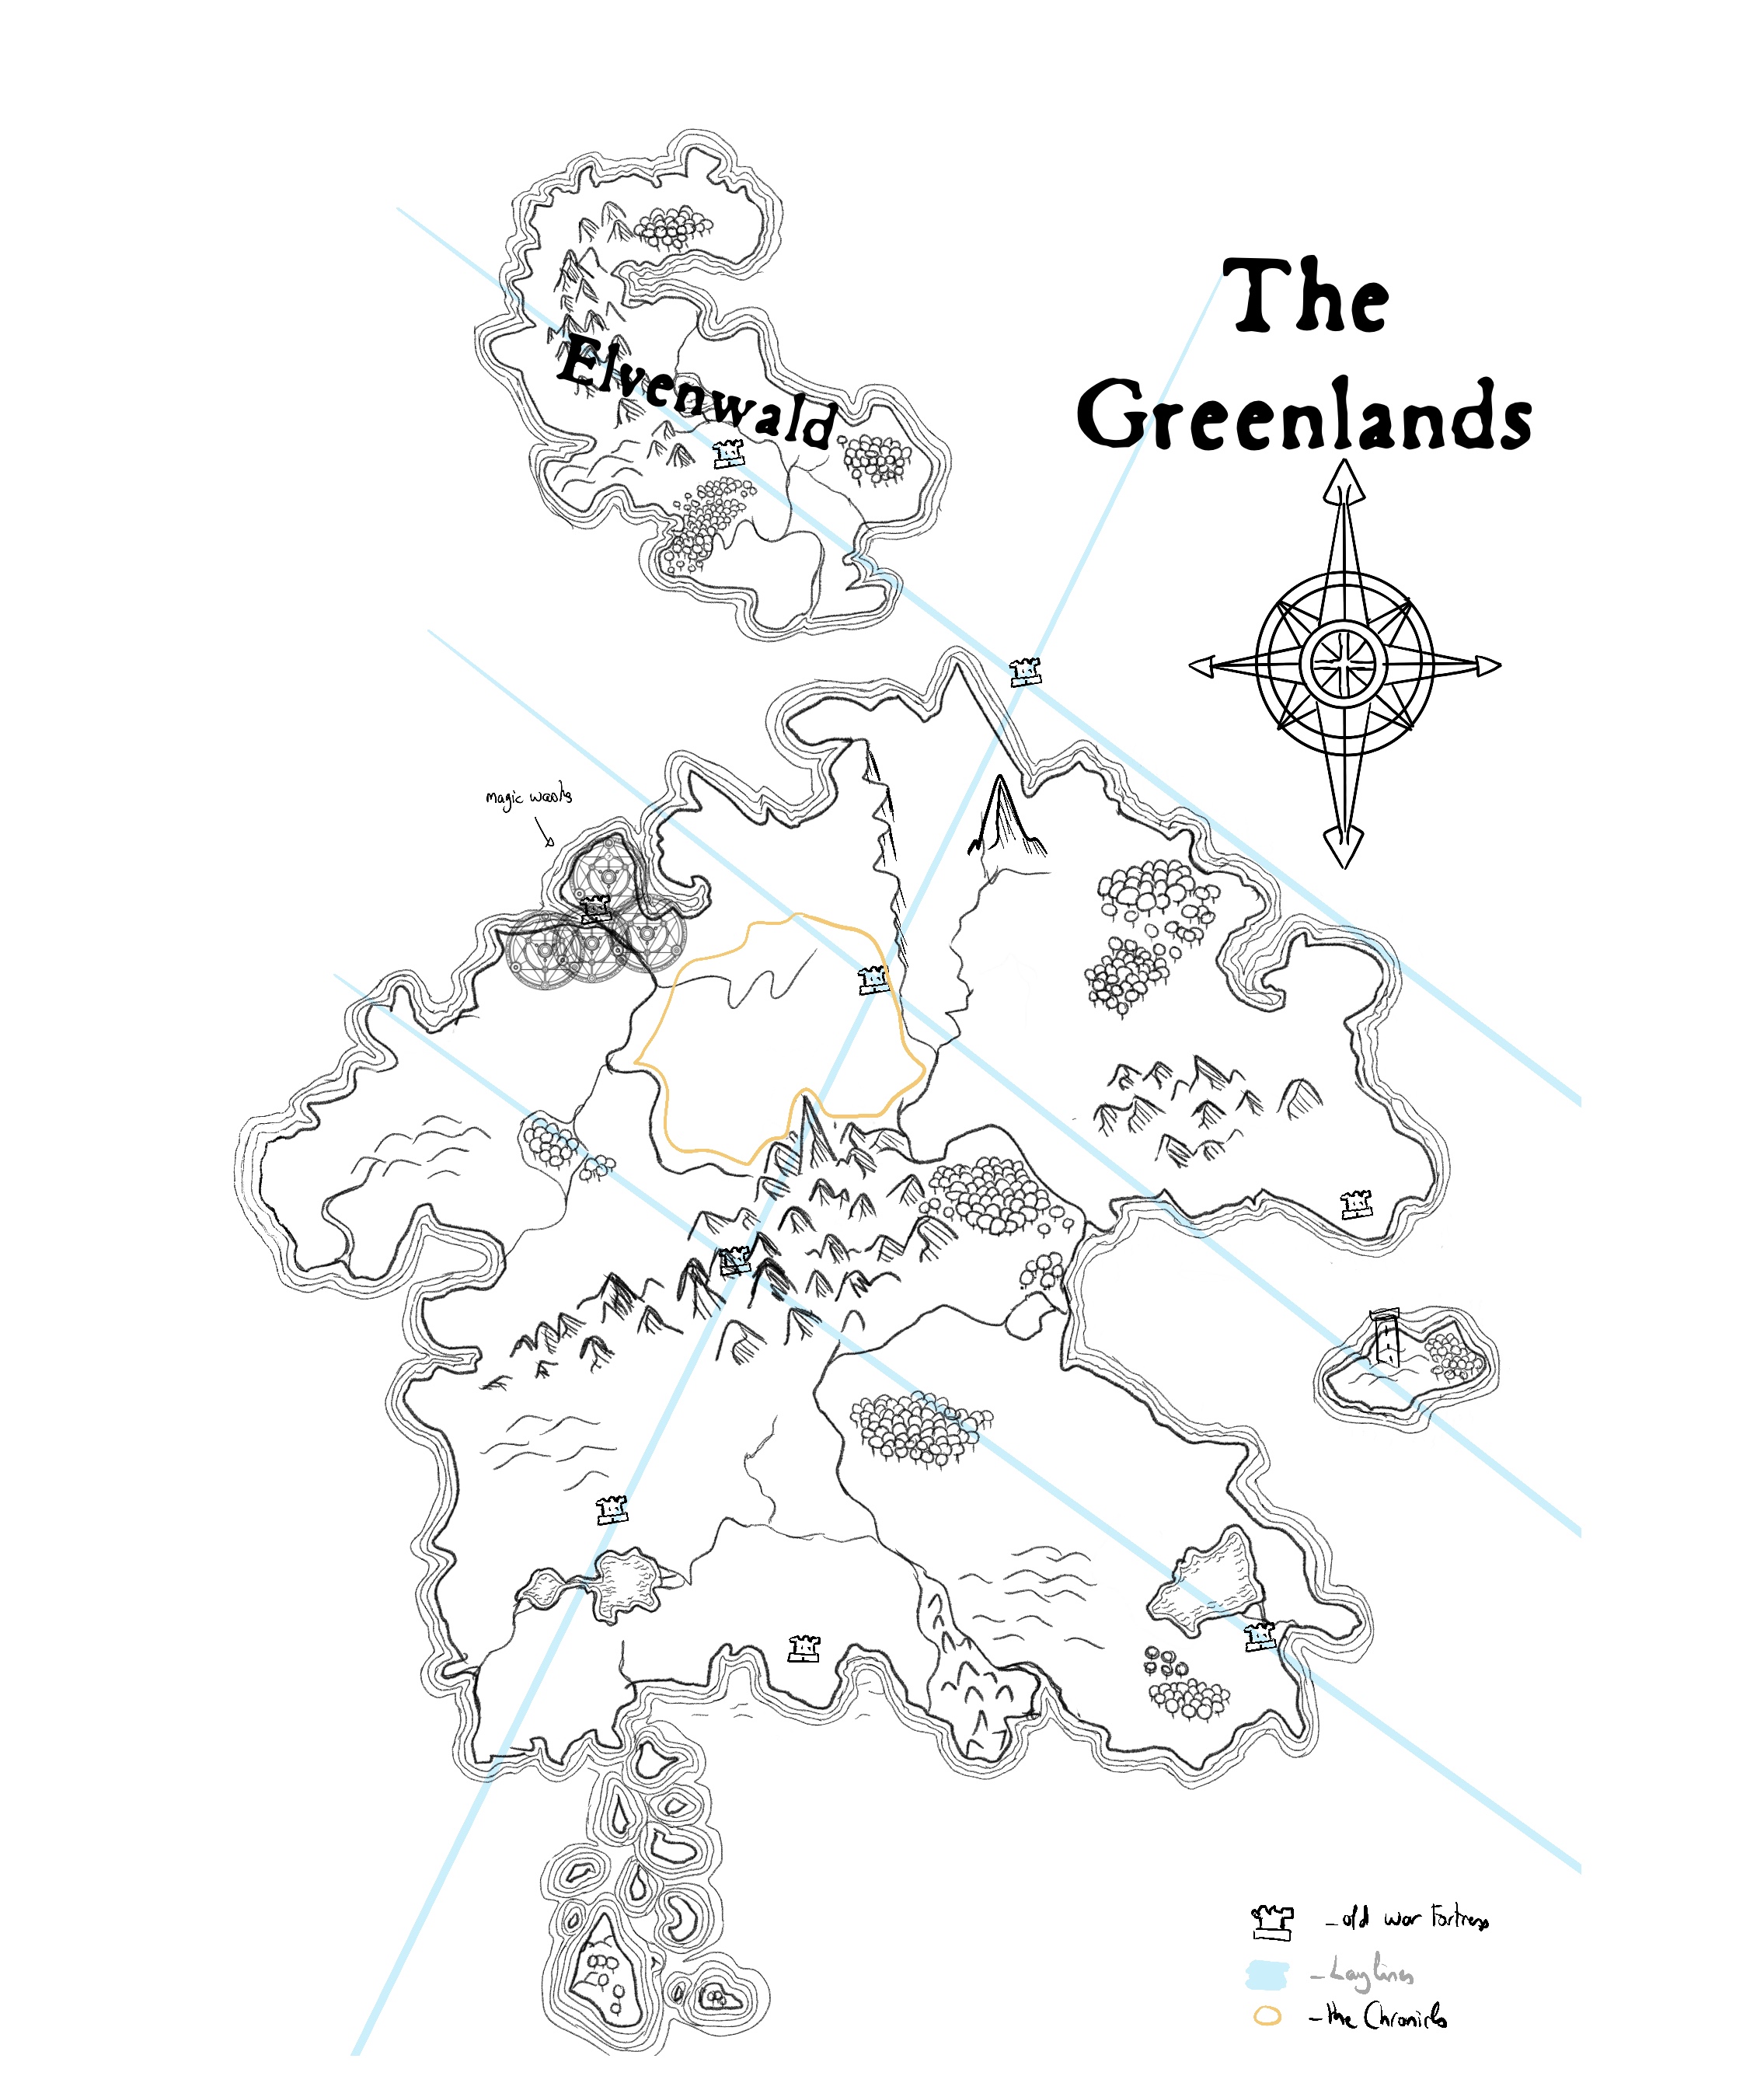 A map of The Greenlands